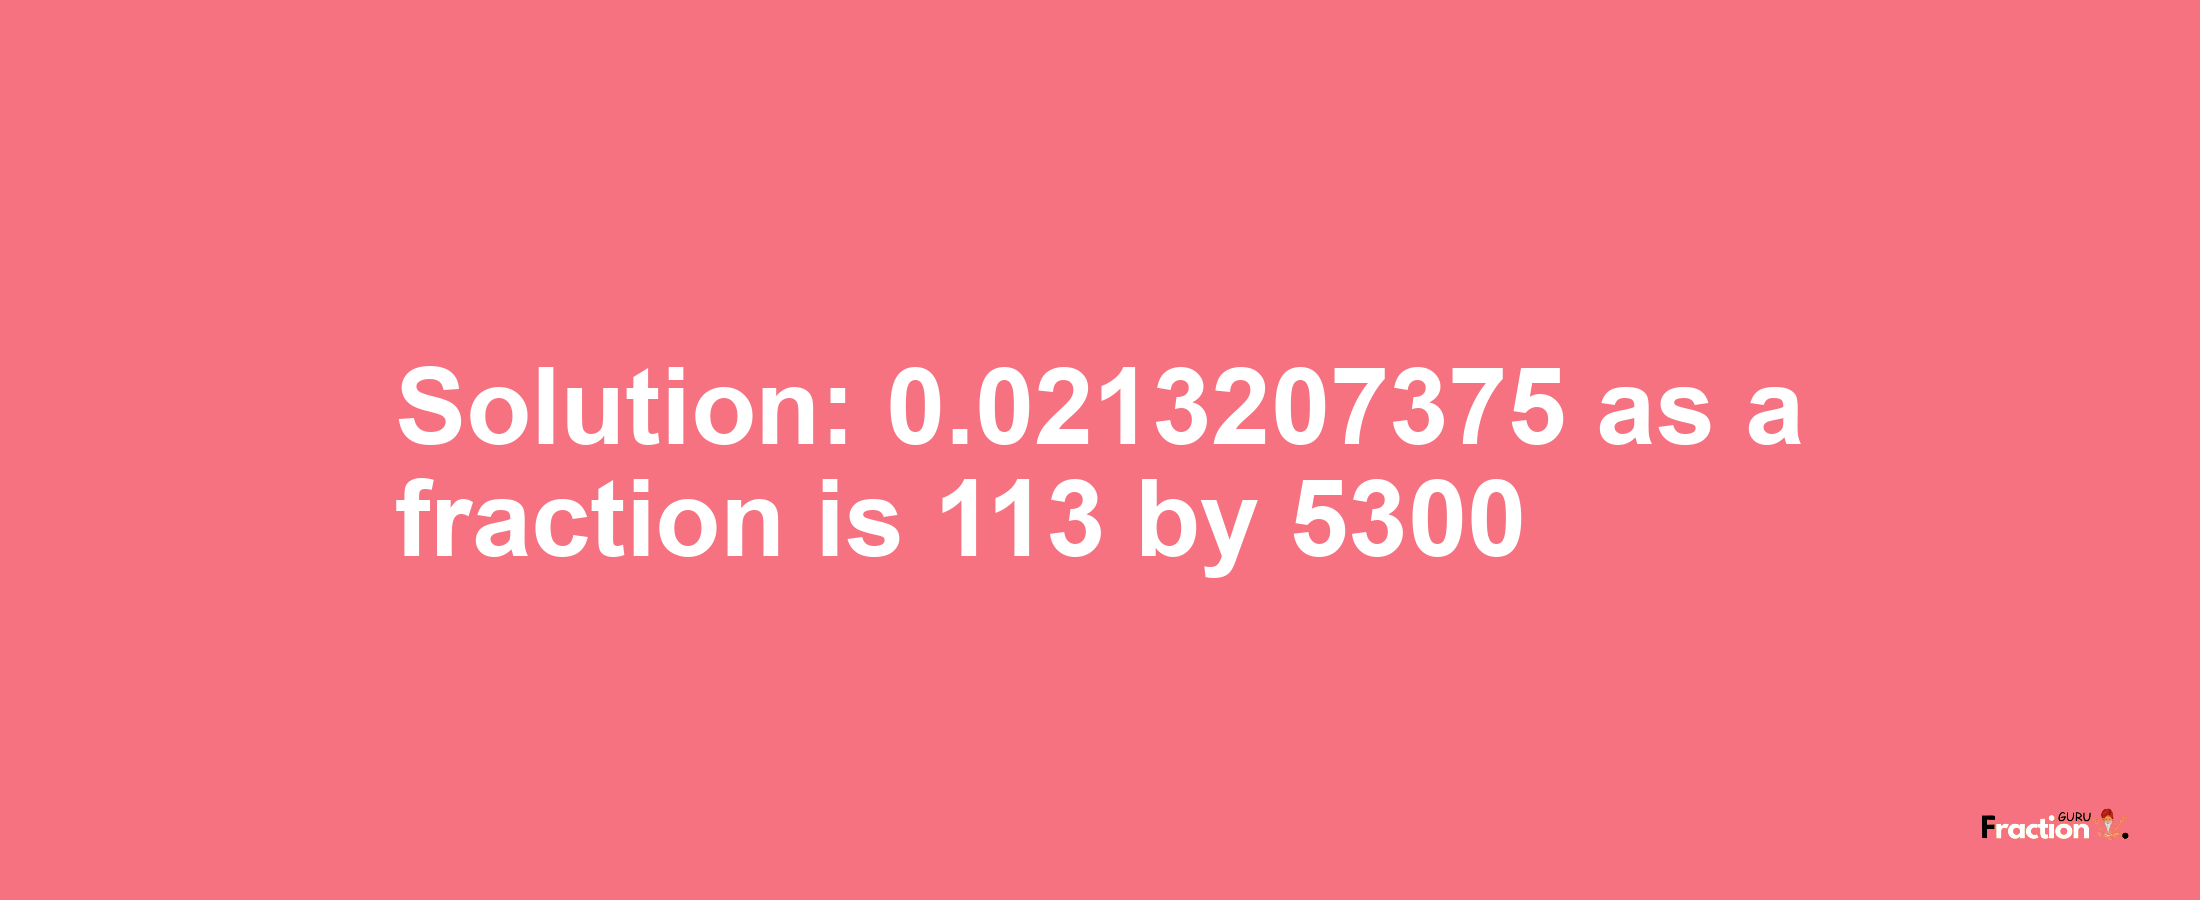 Solution:0.0213207375 as a fraction is 113/5300